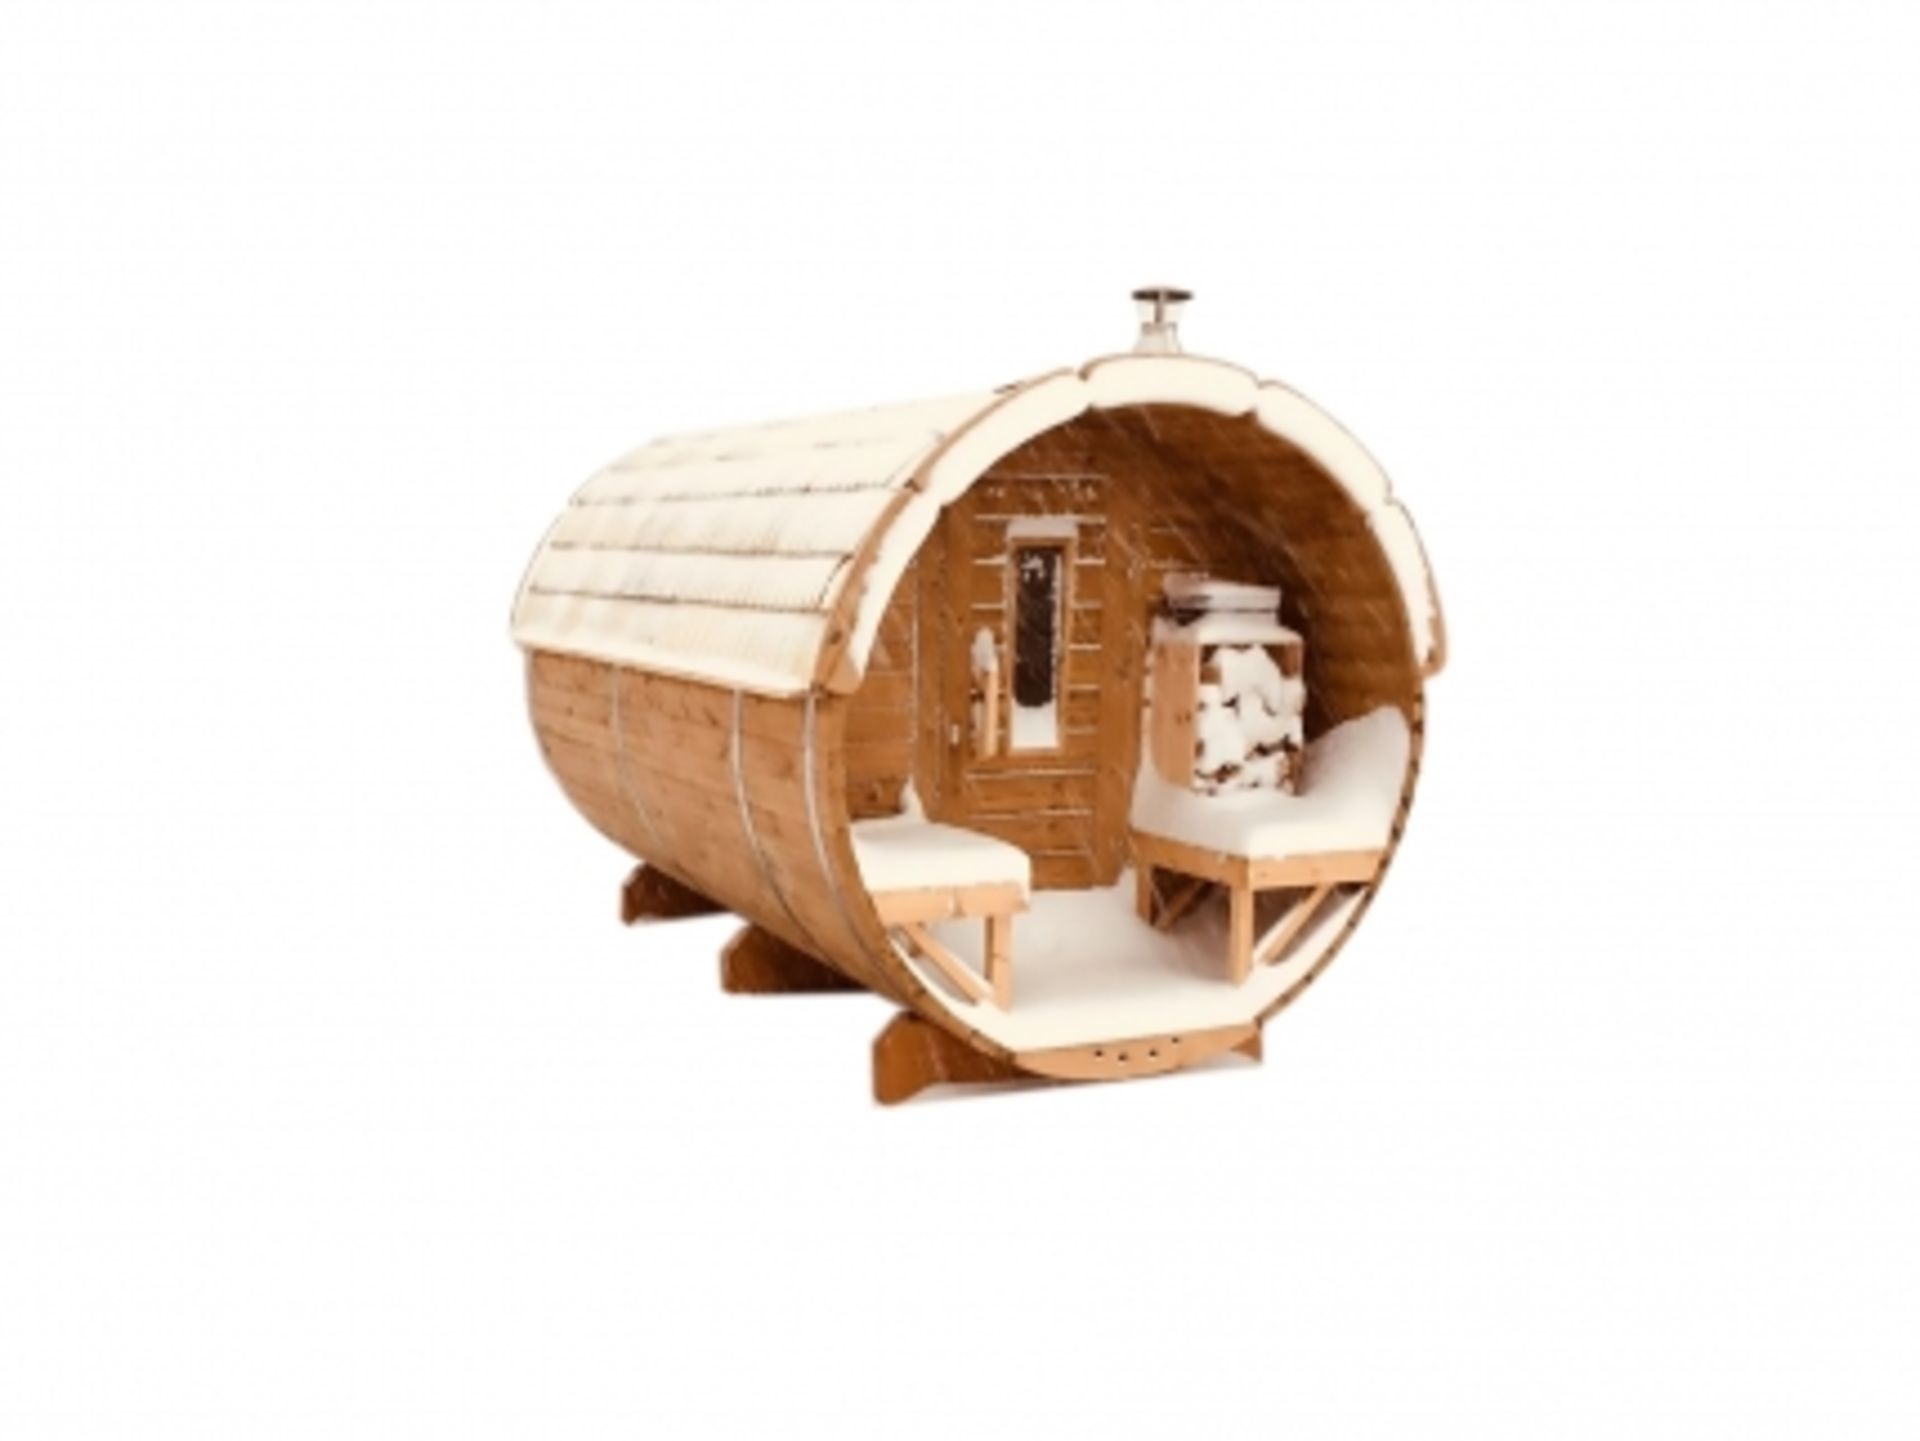 V Brand New Luxury 3 x 1.9m Sauna Barrel with Eco Friendly Roof - Includes Wood Burning Heater -